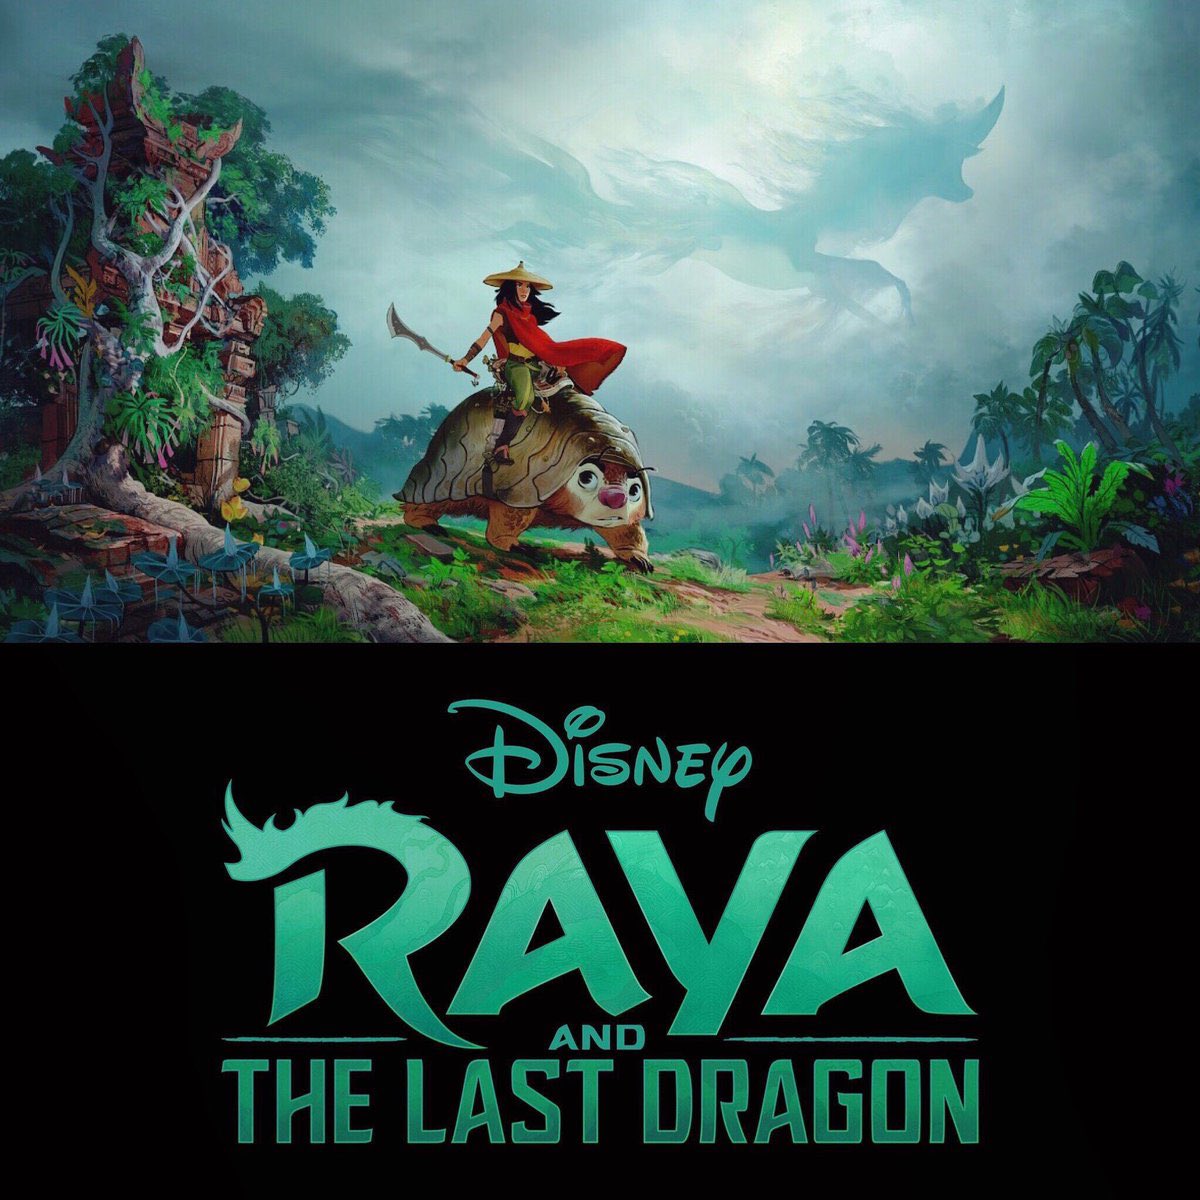 Raya will be an epic fantasy adventure with southeast Asian themes, set in a realm called Lumandra, described as 'a reimagined earth inhabited by an ancient civilization'. Five clans form the land of the dragon, and Raya is determined to find the last dragon.